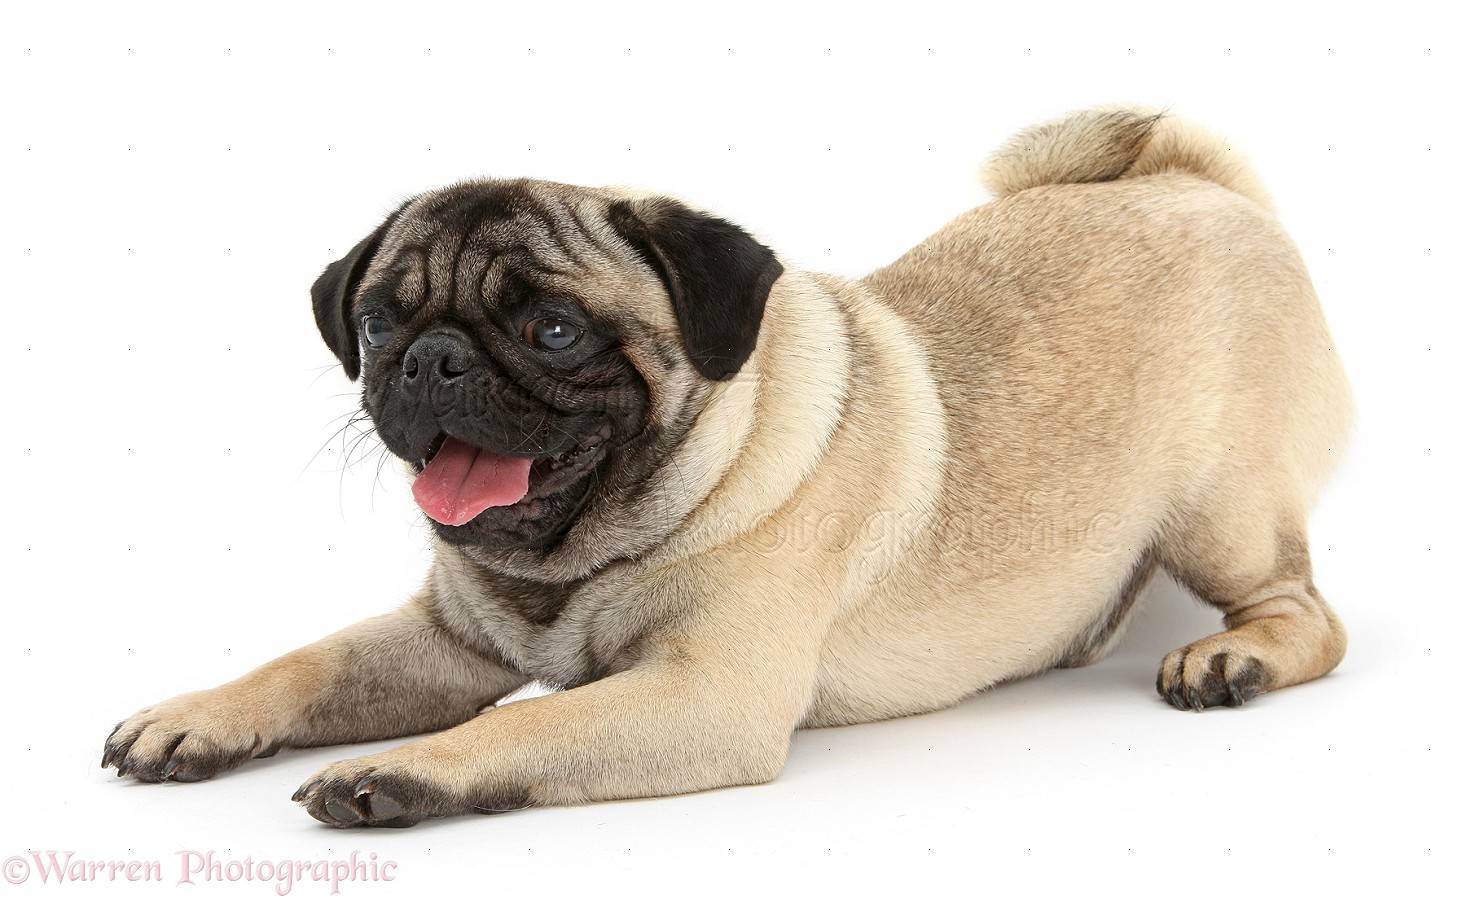 34346-Fawn-Pug-dog-in-play-bow-attitude-white-background.jpg